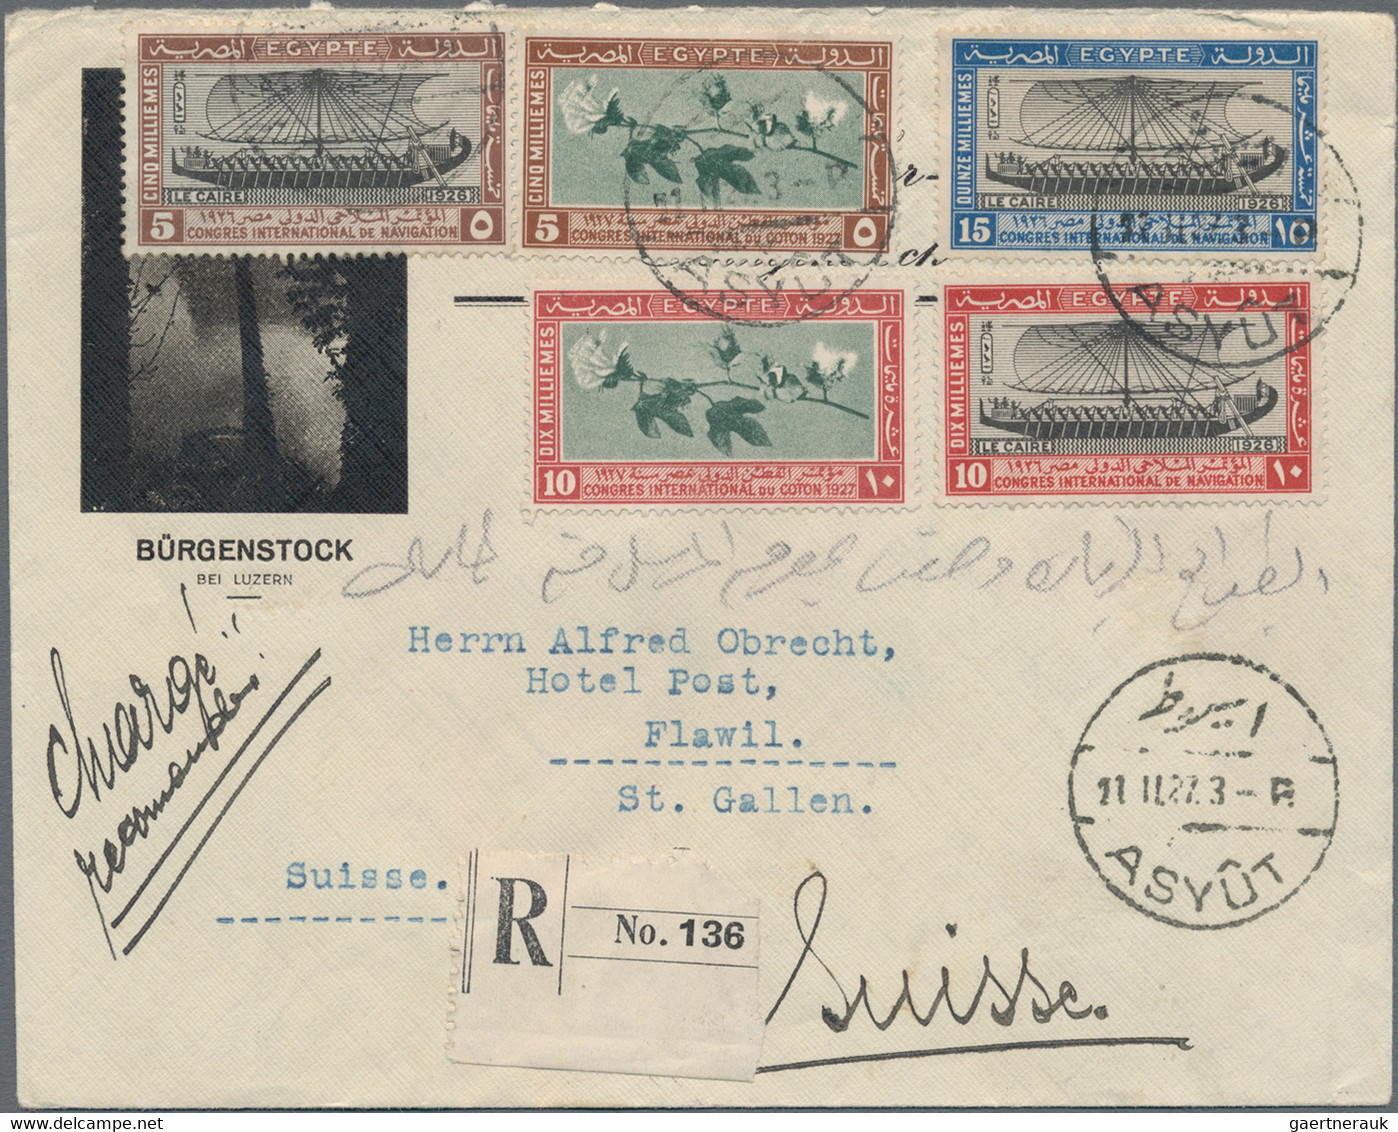 Egypt: 1890's-modern: About 125 covers, postcards and parcel cards, with a lot o